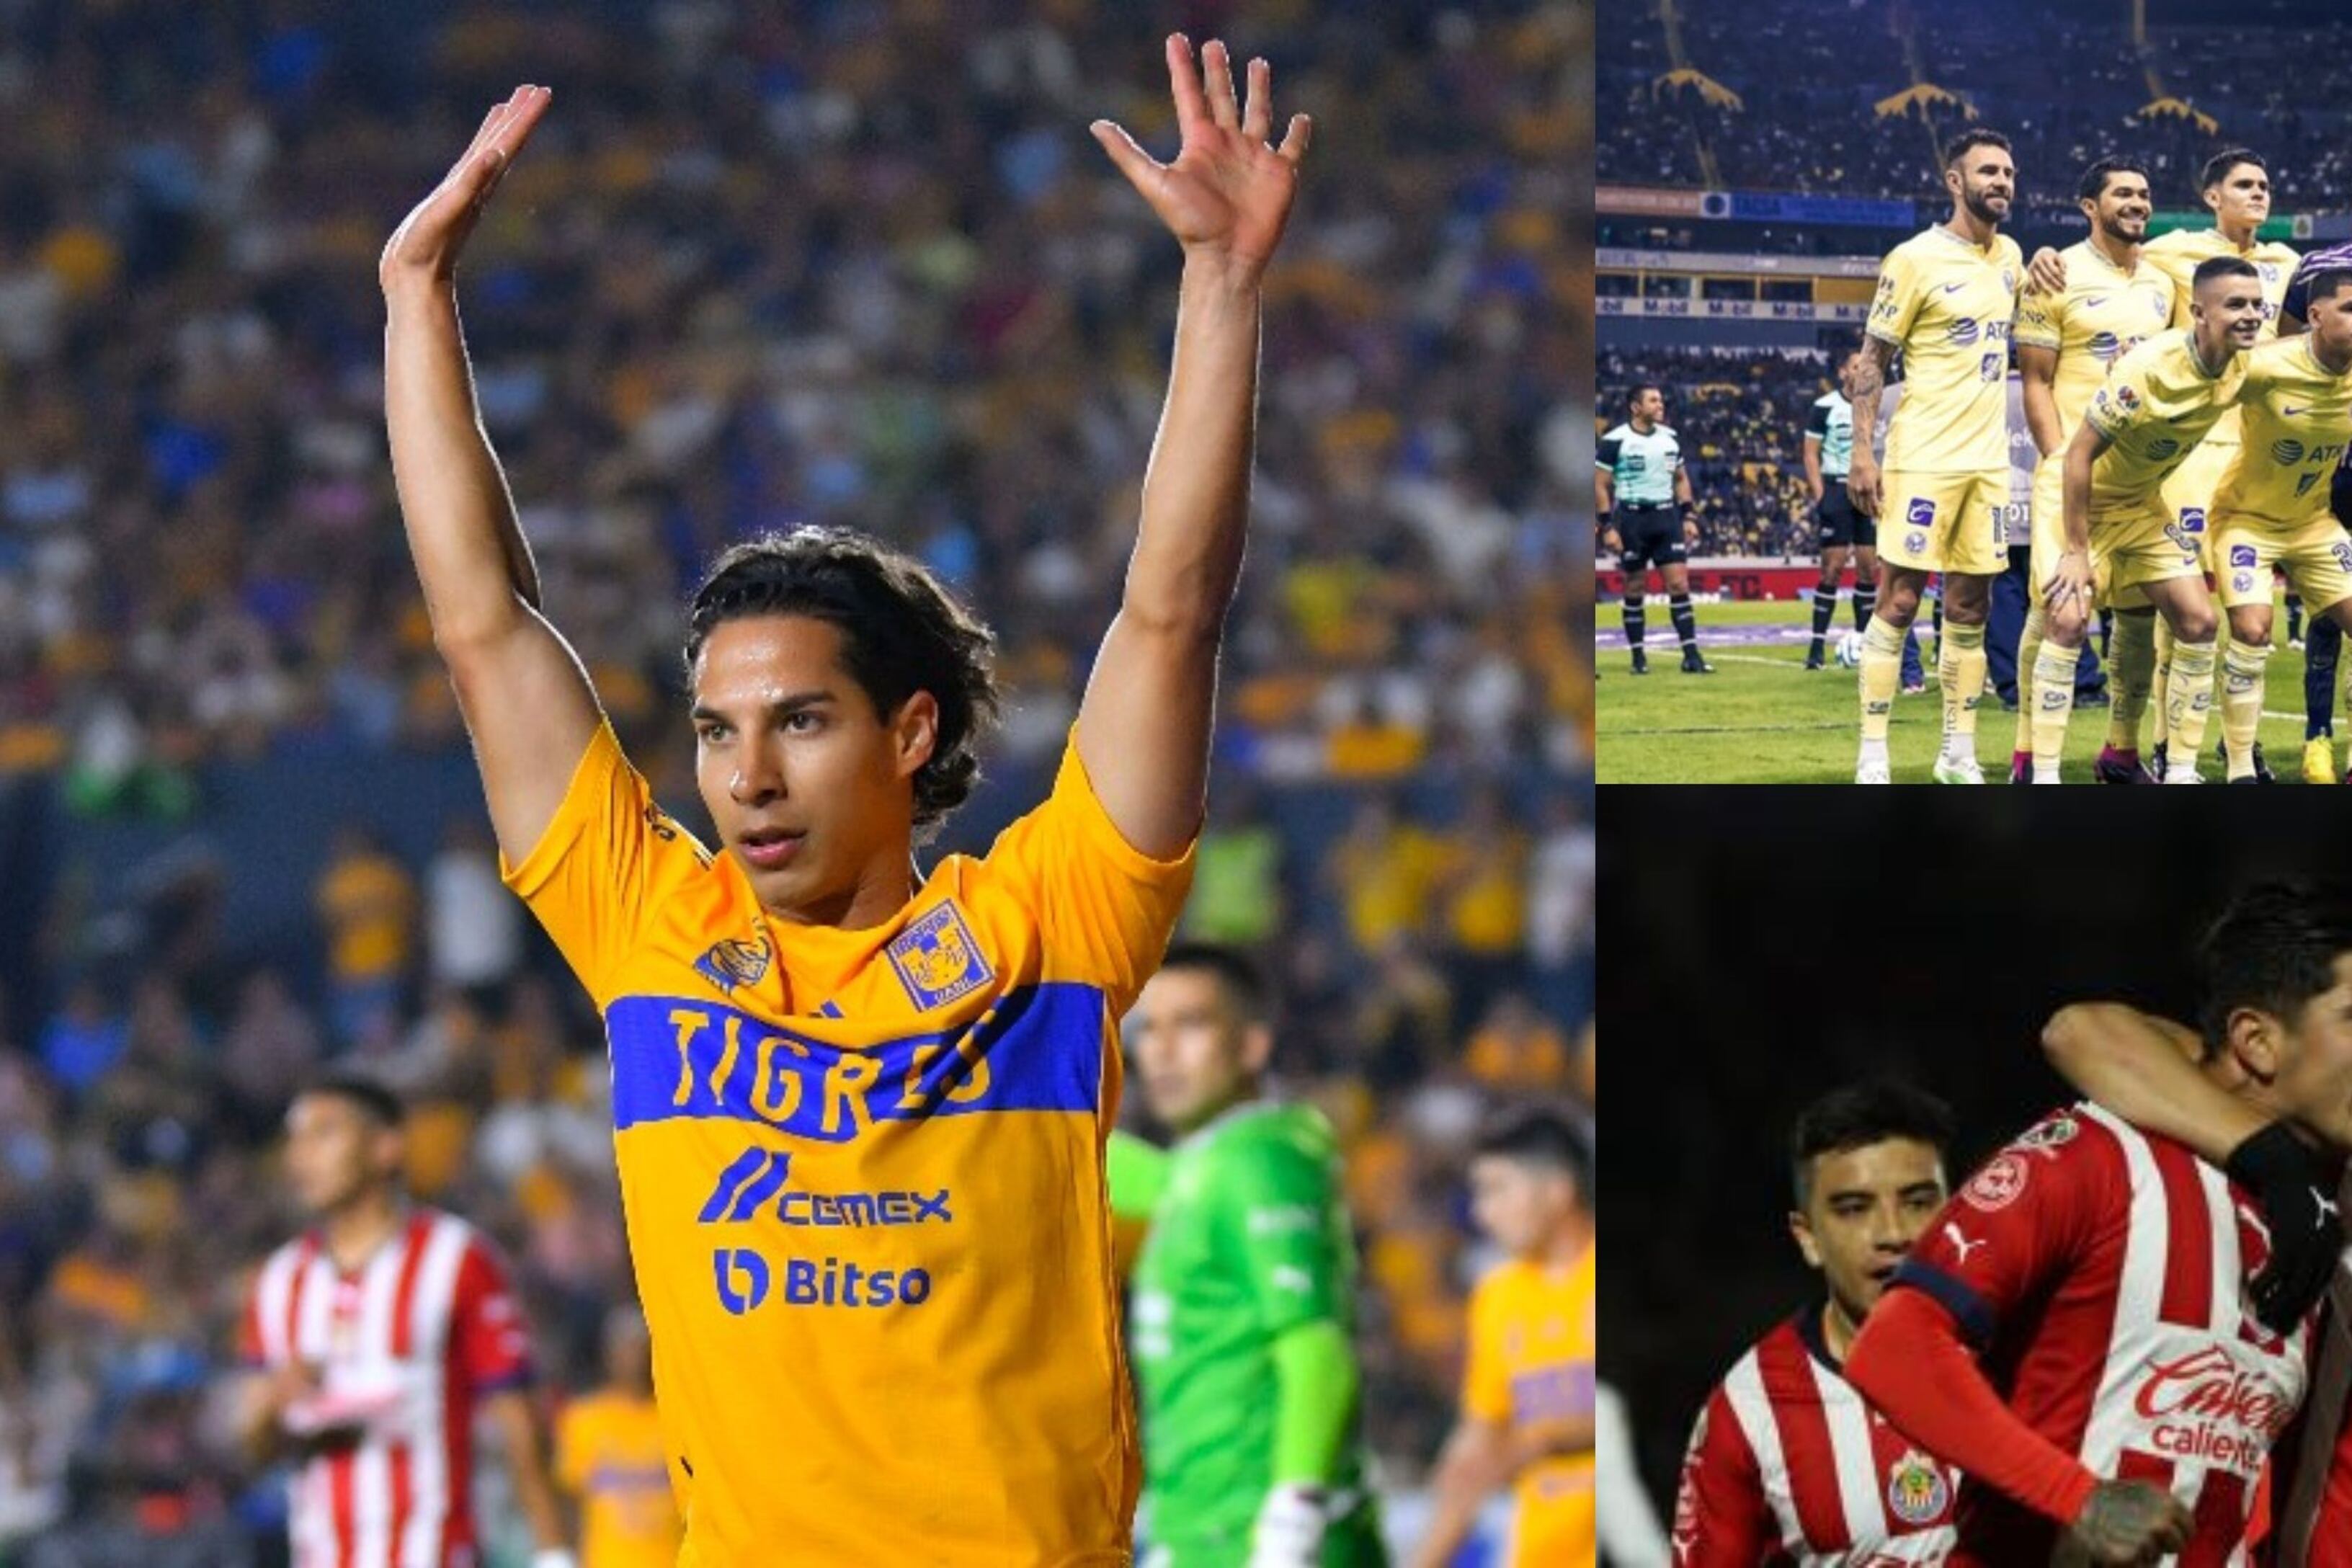 After starting to stand out in Tigres, the club that will pay 8 million for Lainez